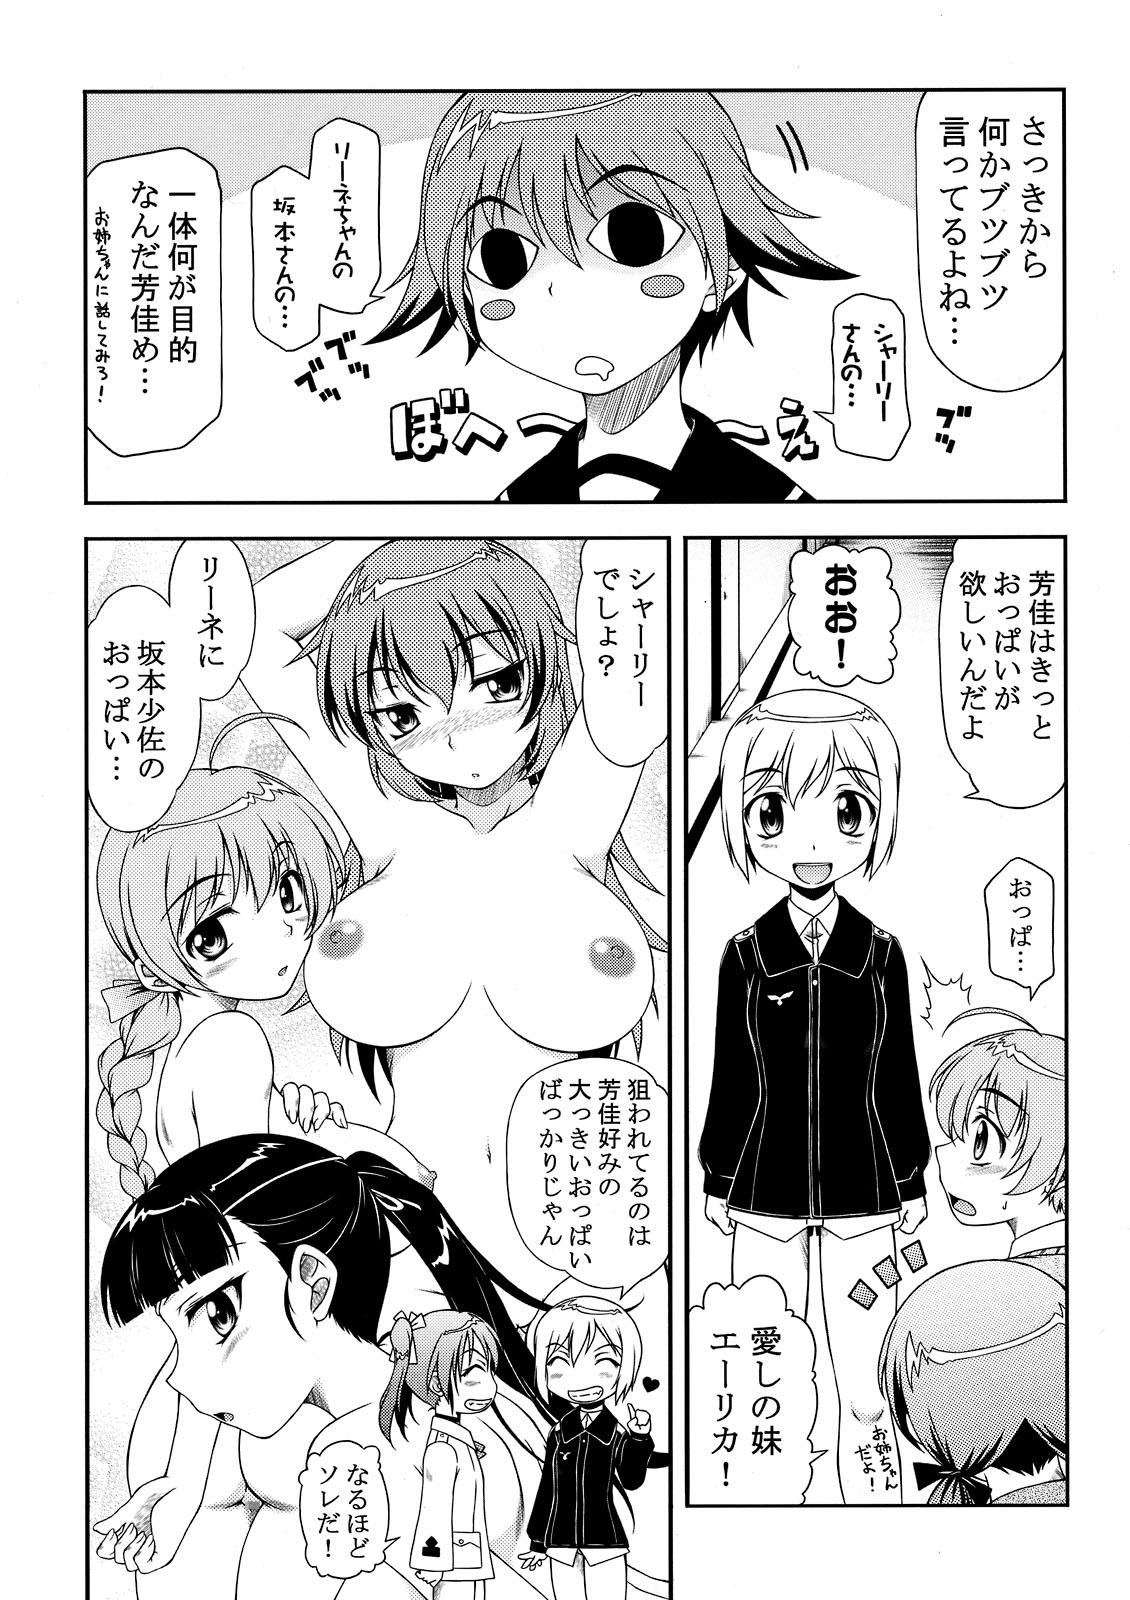 Ethnic Hokyuubusshi 501 - Strike witches Hidden - Page 8